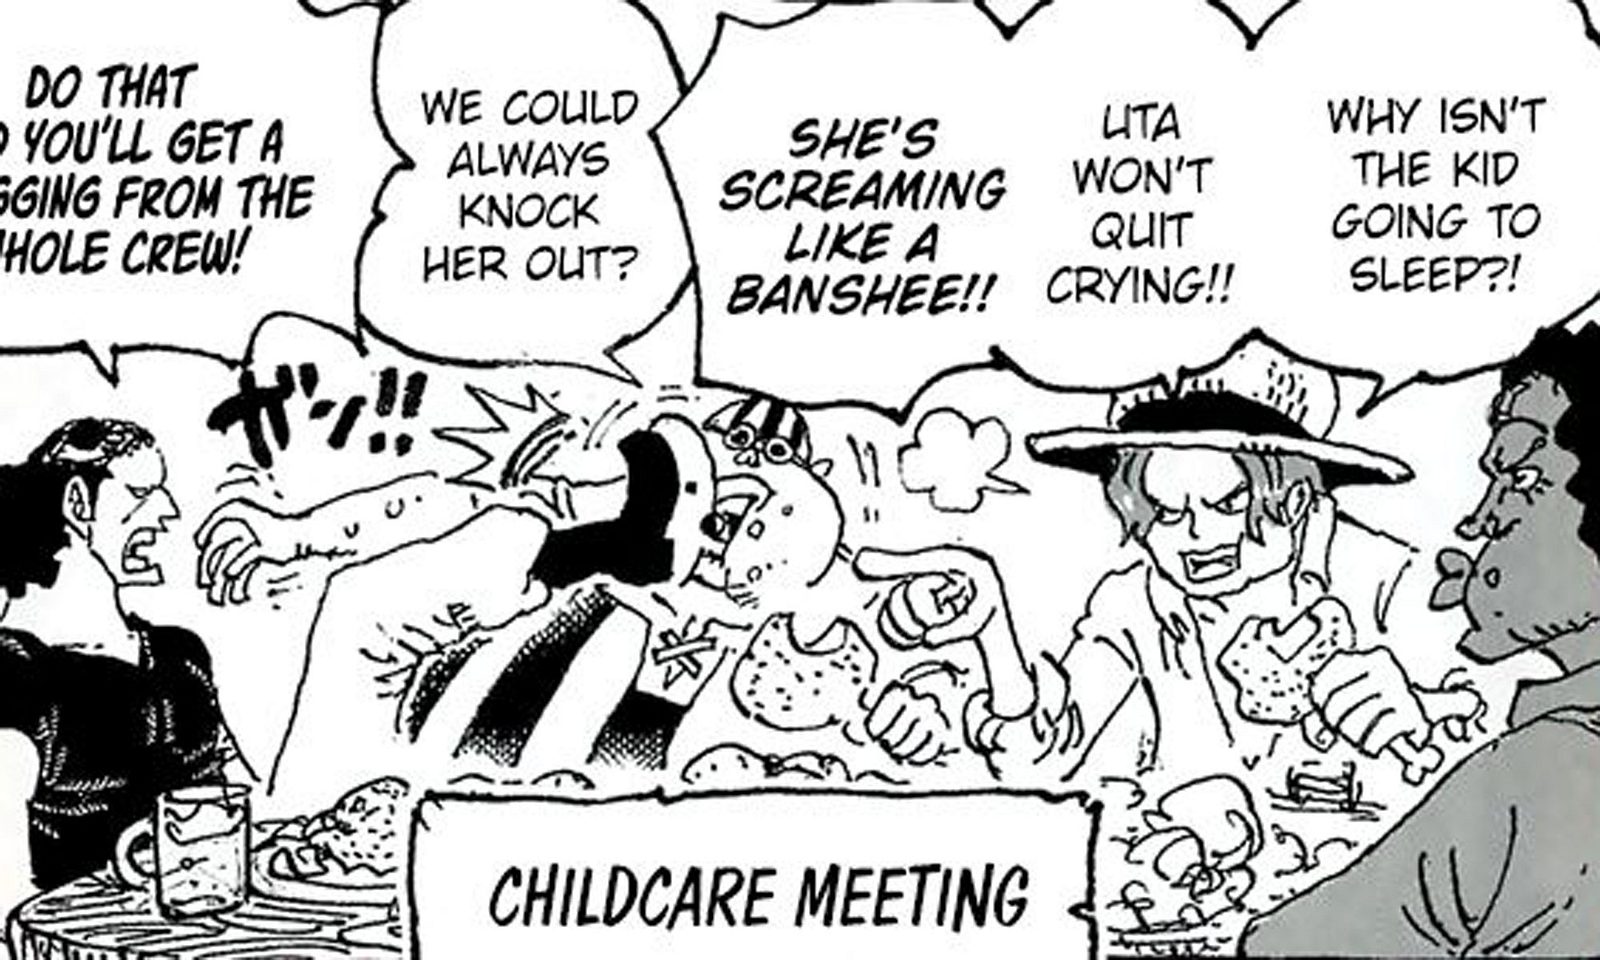 One Piece Chapter 1058 Spoilers. #anime #manga #onepiece #onepiece1058